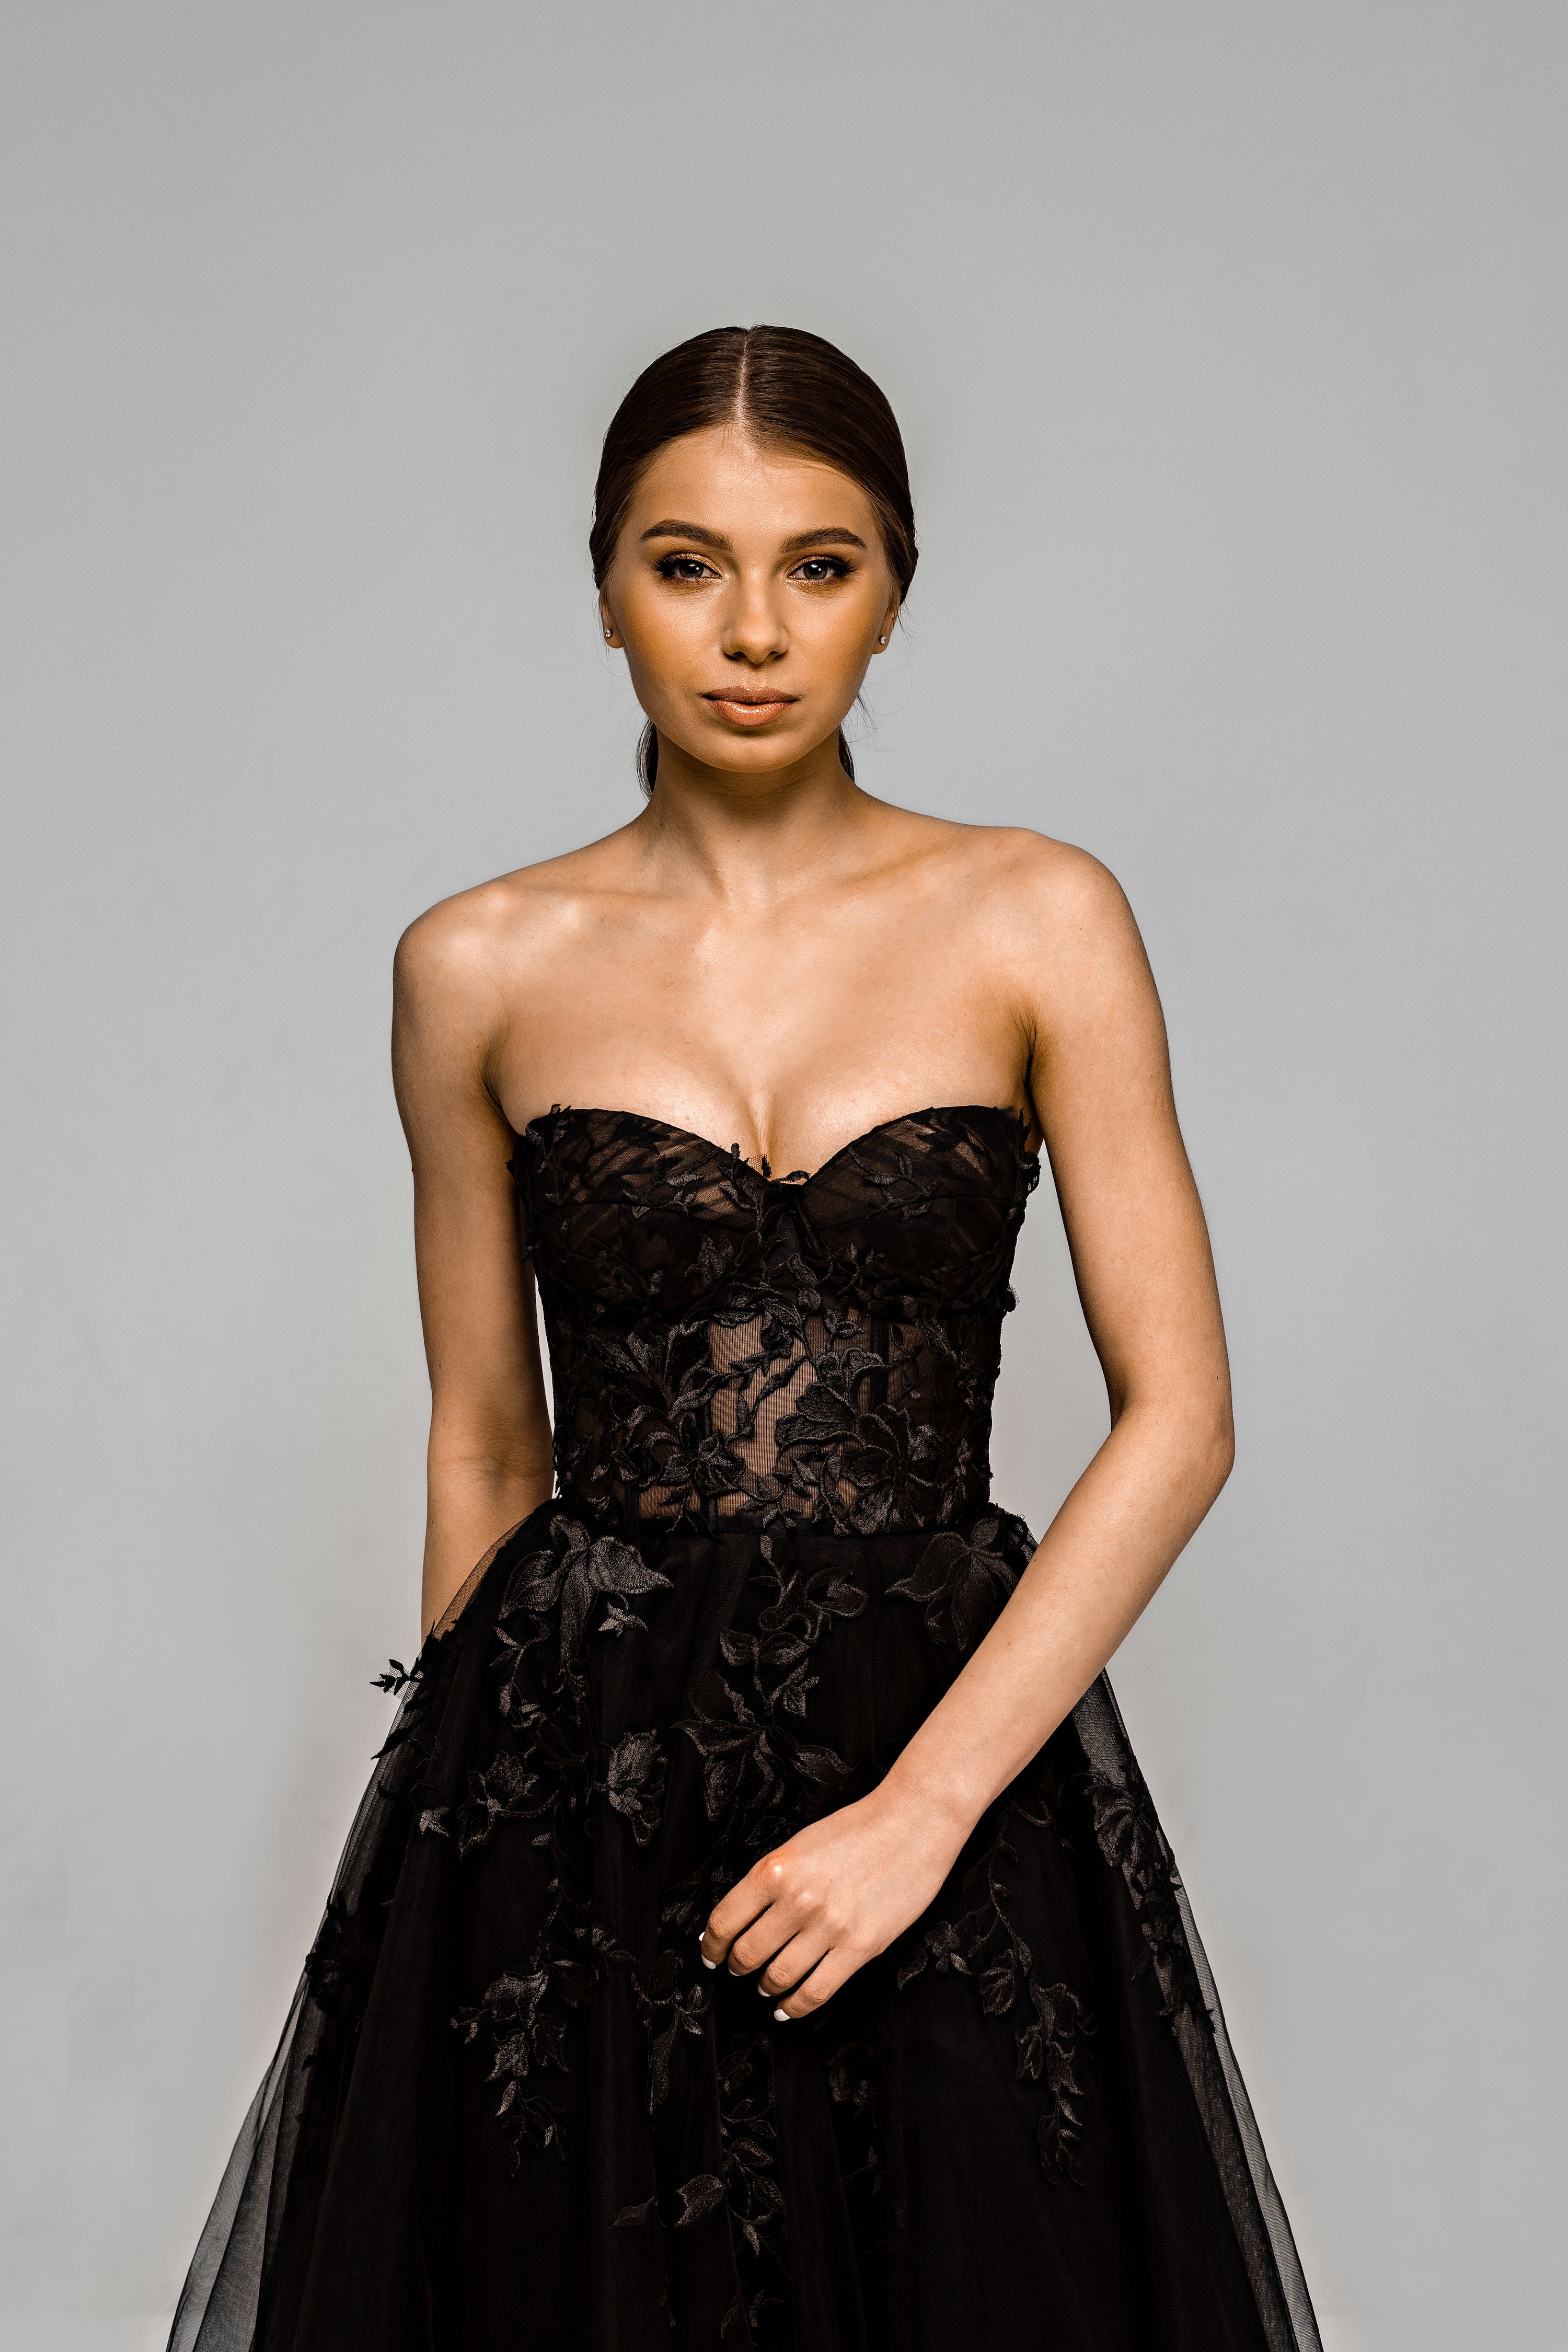 "Demia" Black Corset Wedding Dress with Lace-Adorned Mesh Skirt